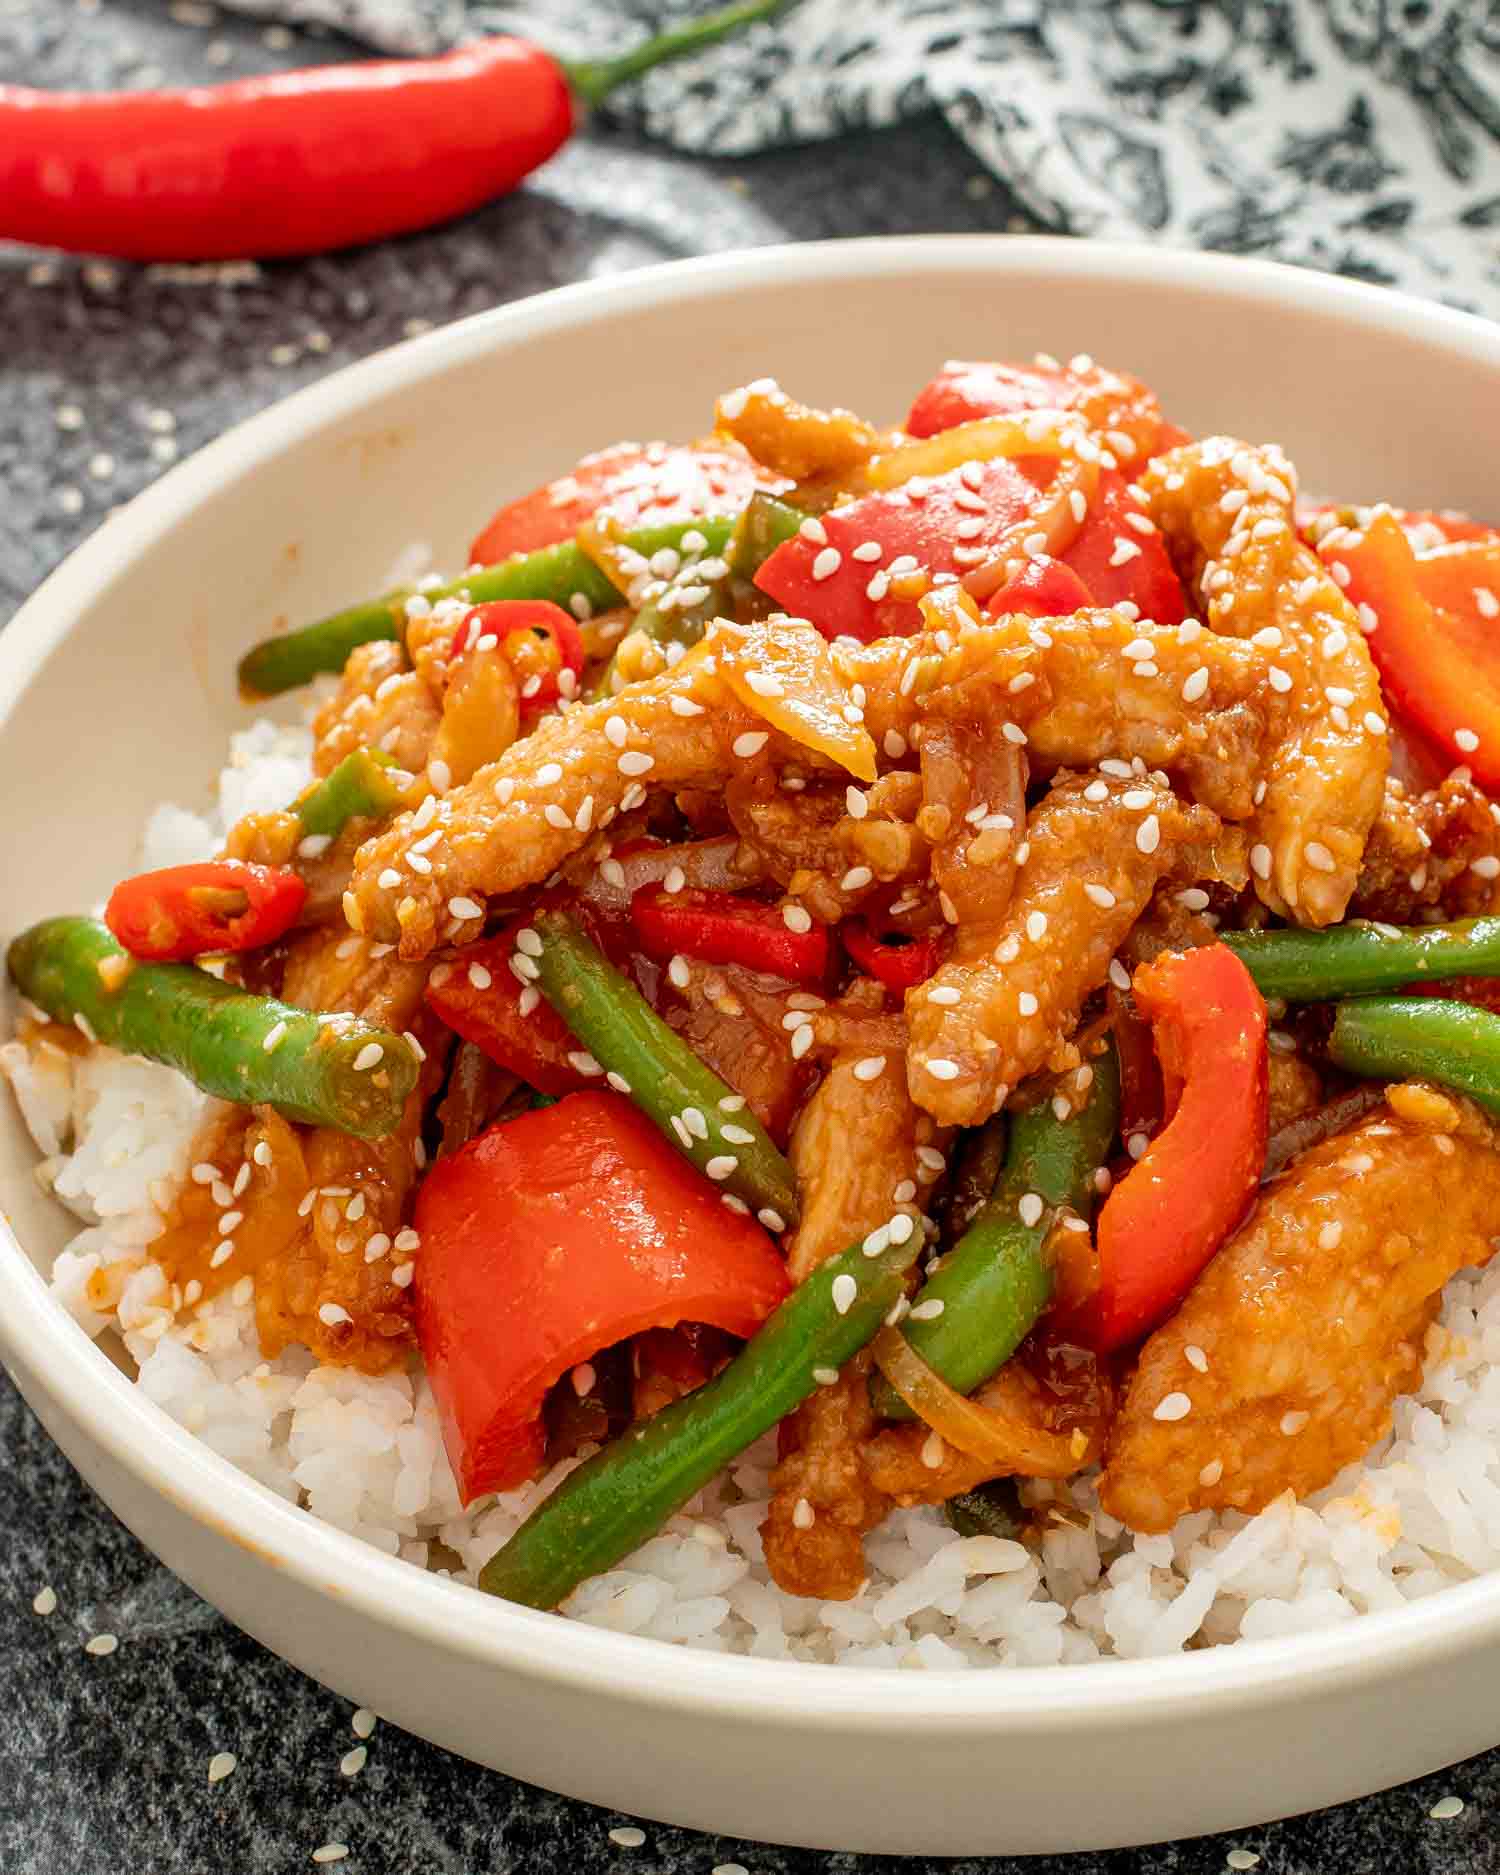 crispy honey chili chicken with rice in a beige bowl.